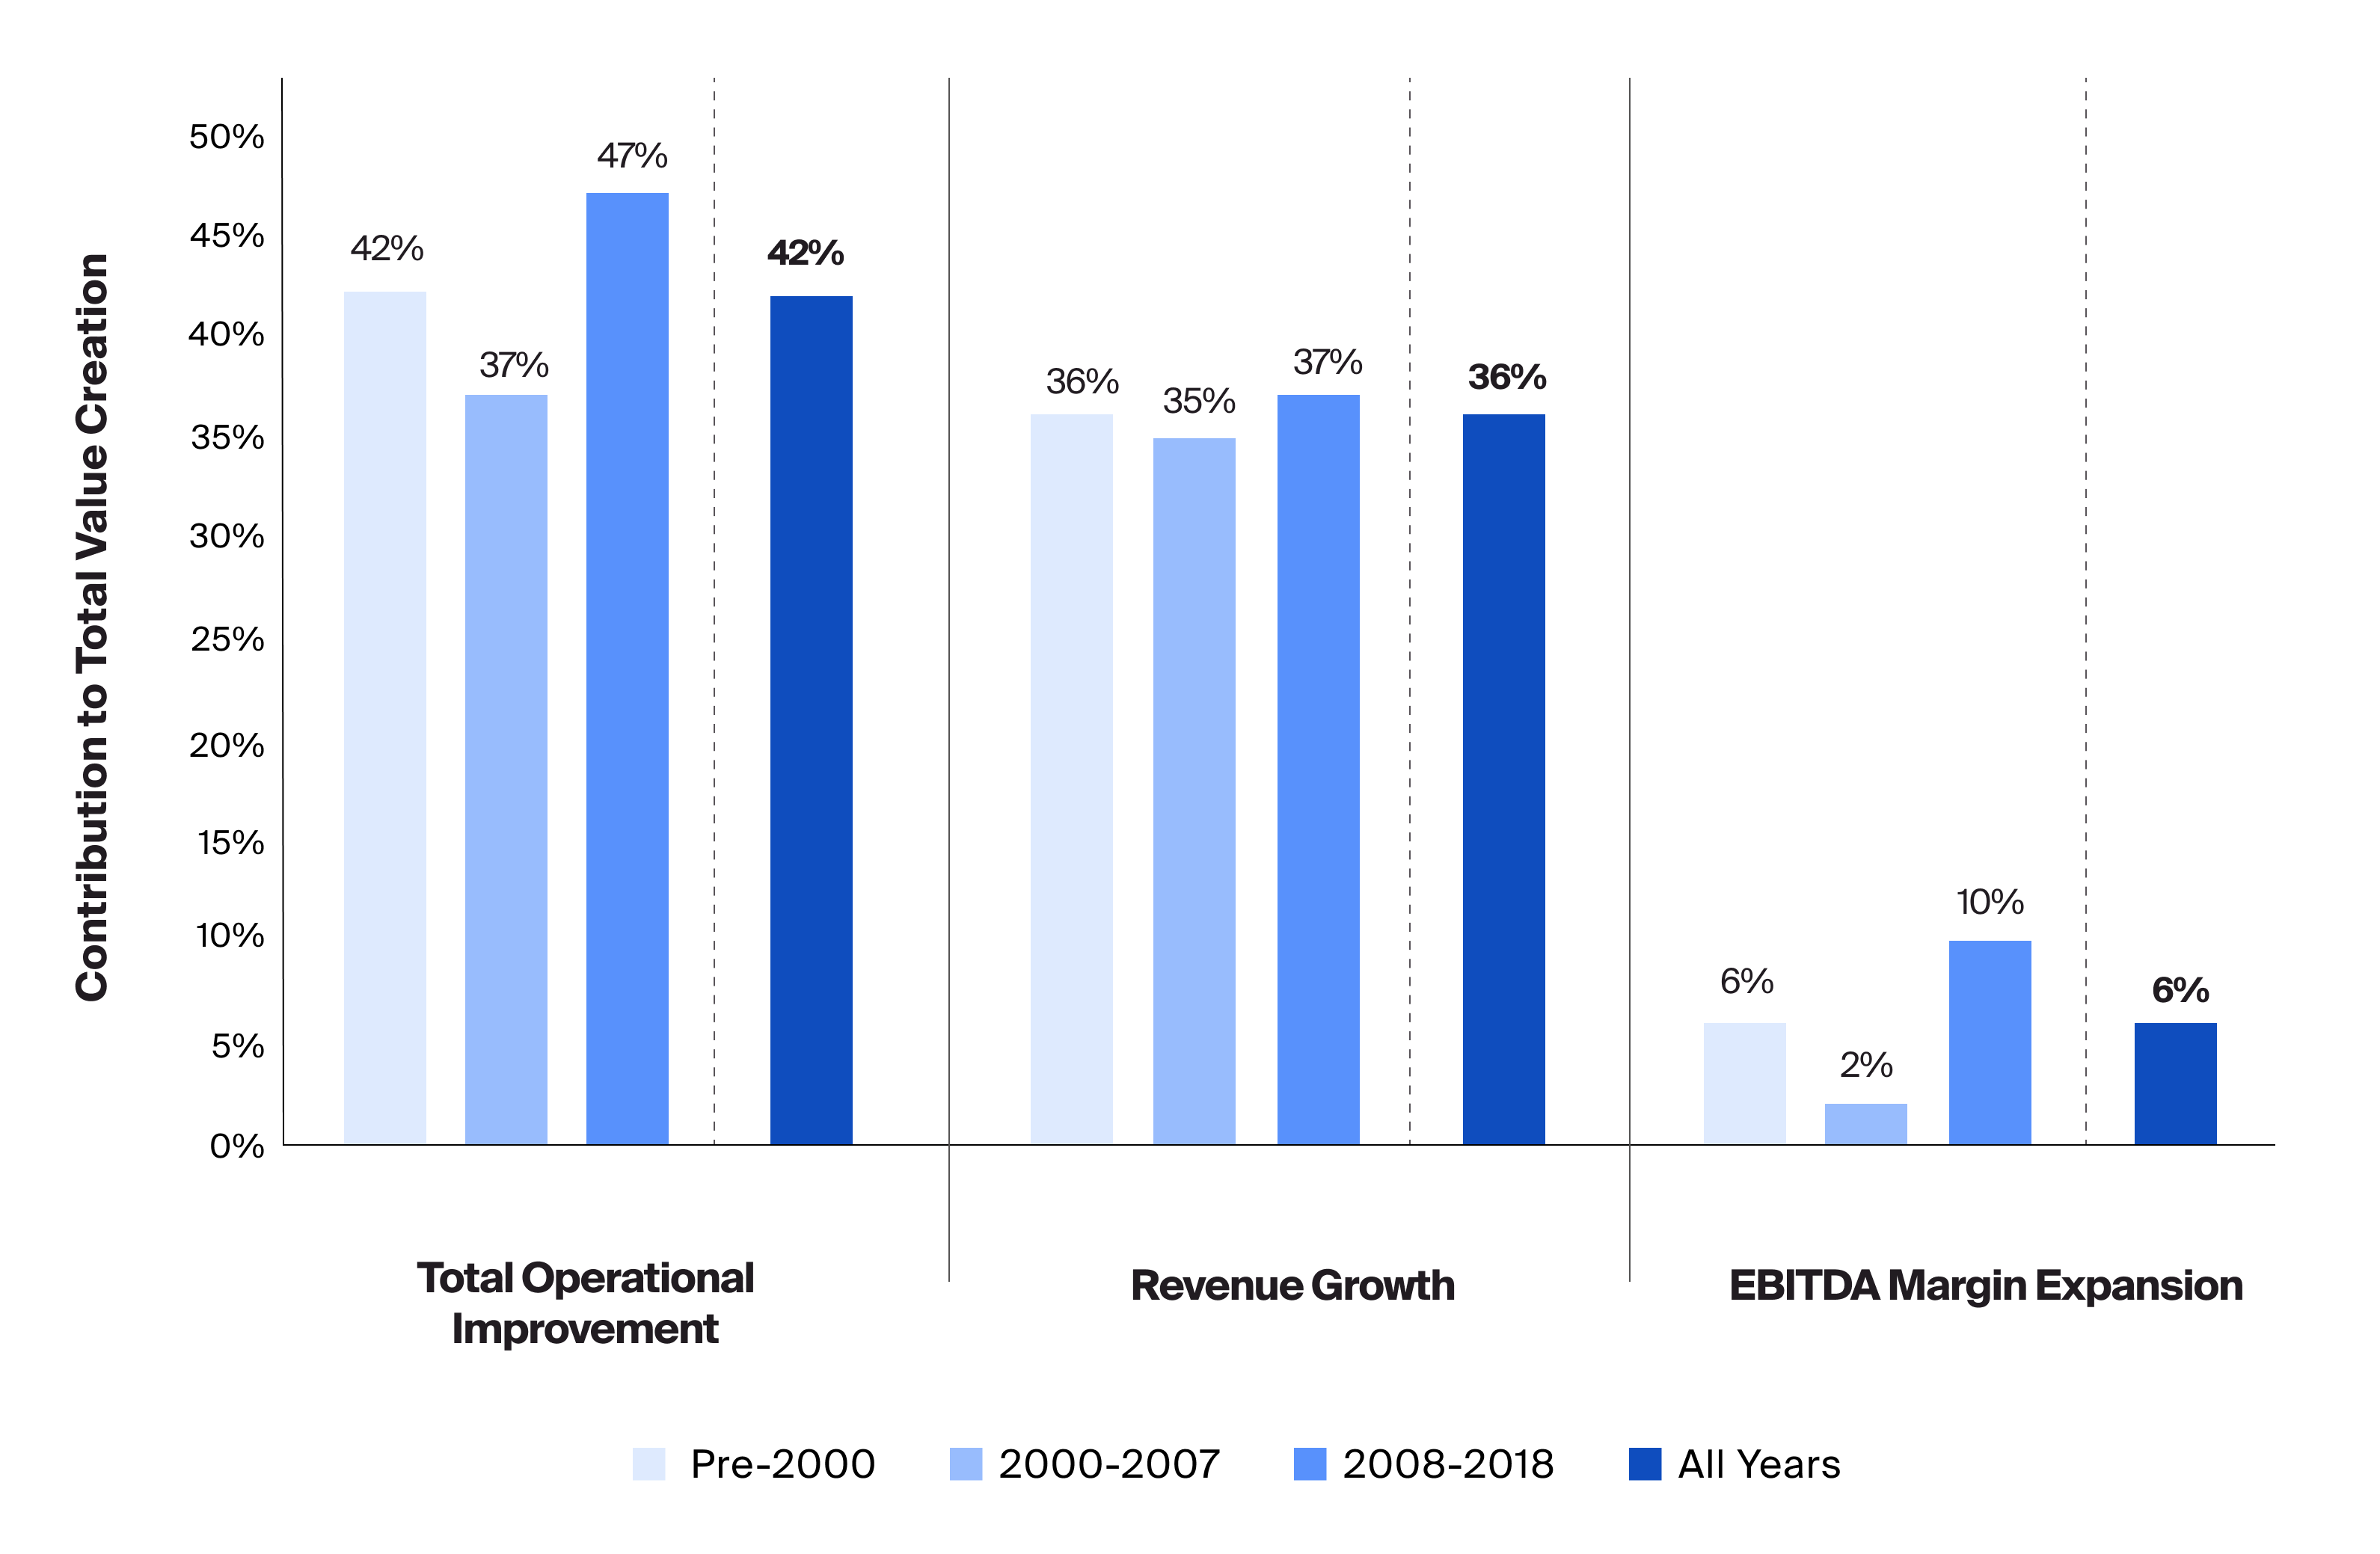 Operational improvements delivered a positive contribution to total private equity value creation across time, with revenue growth the primary driver